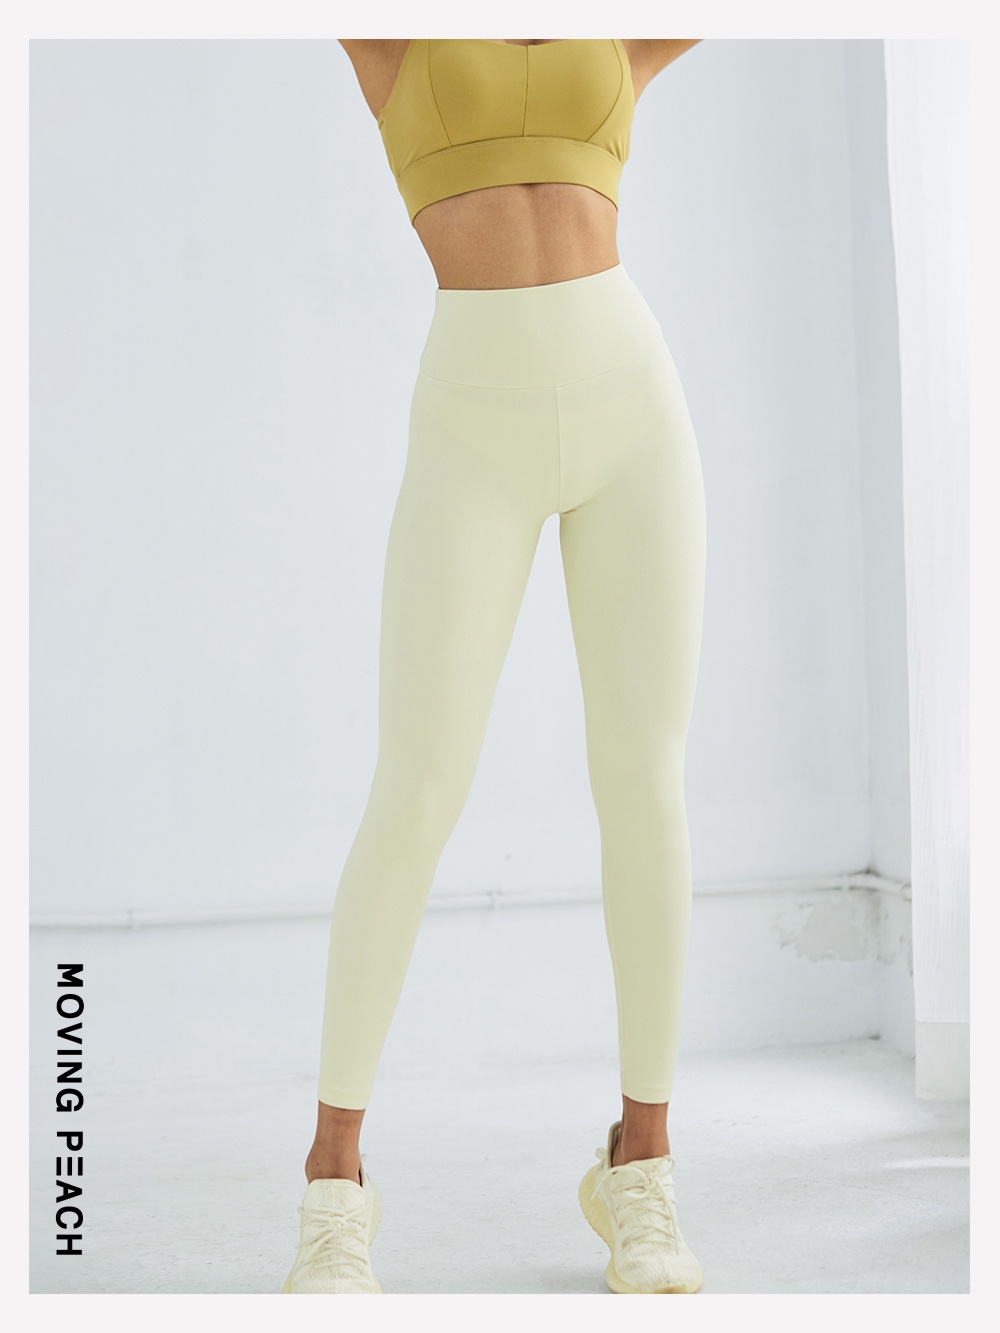 Rushed Peach Lift High-Waisted Leggings with Side Pockets, Women's Fashion,  Activewear on Carousell